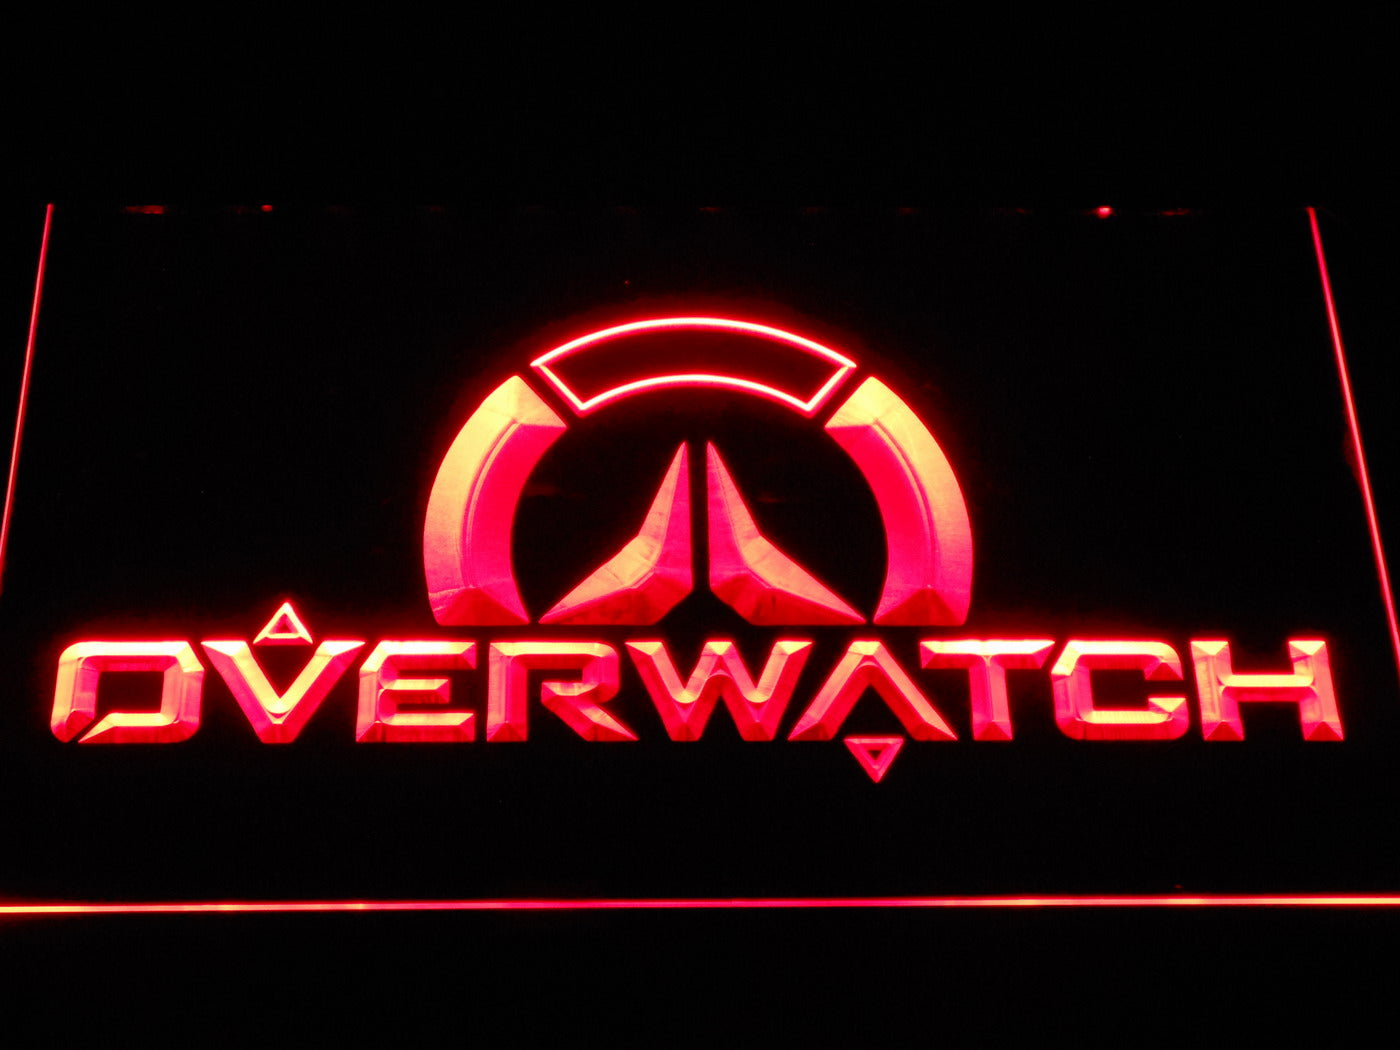 Overwatch Game Neon Light LED Sign